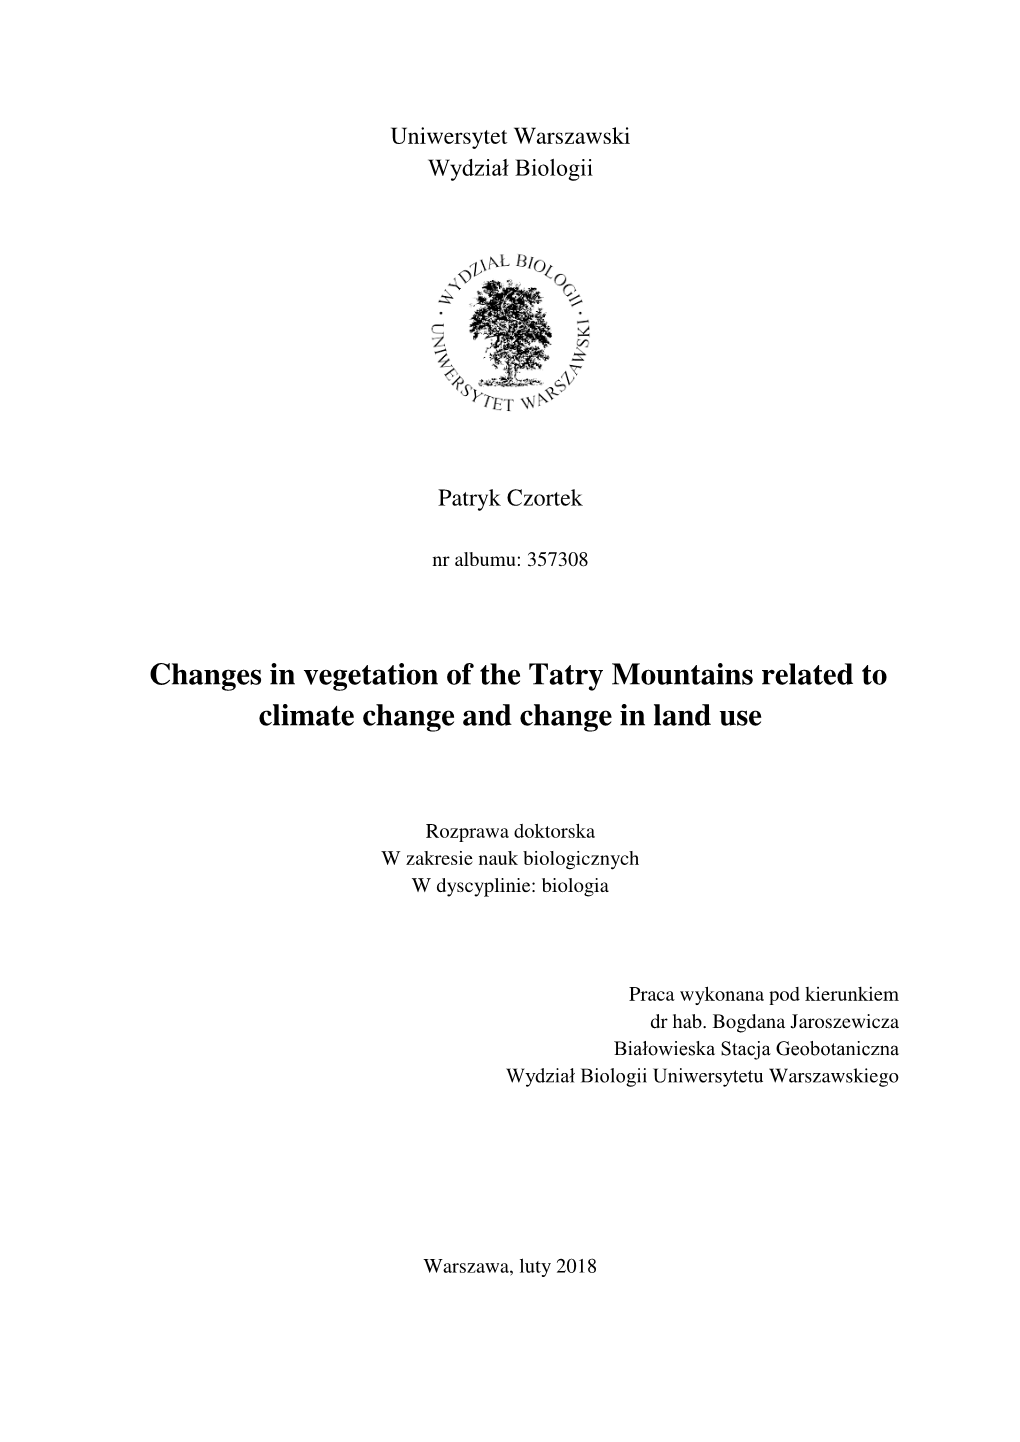 Changes in Vegetation of the Tatry Mountains Related to Climate Change and Change in Land Use